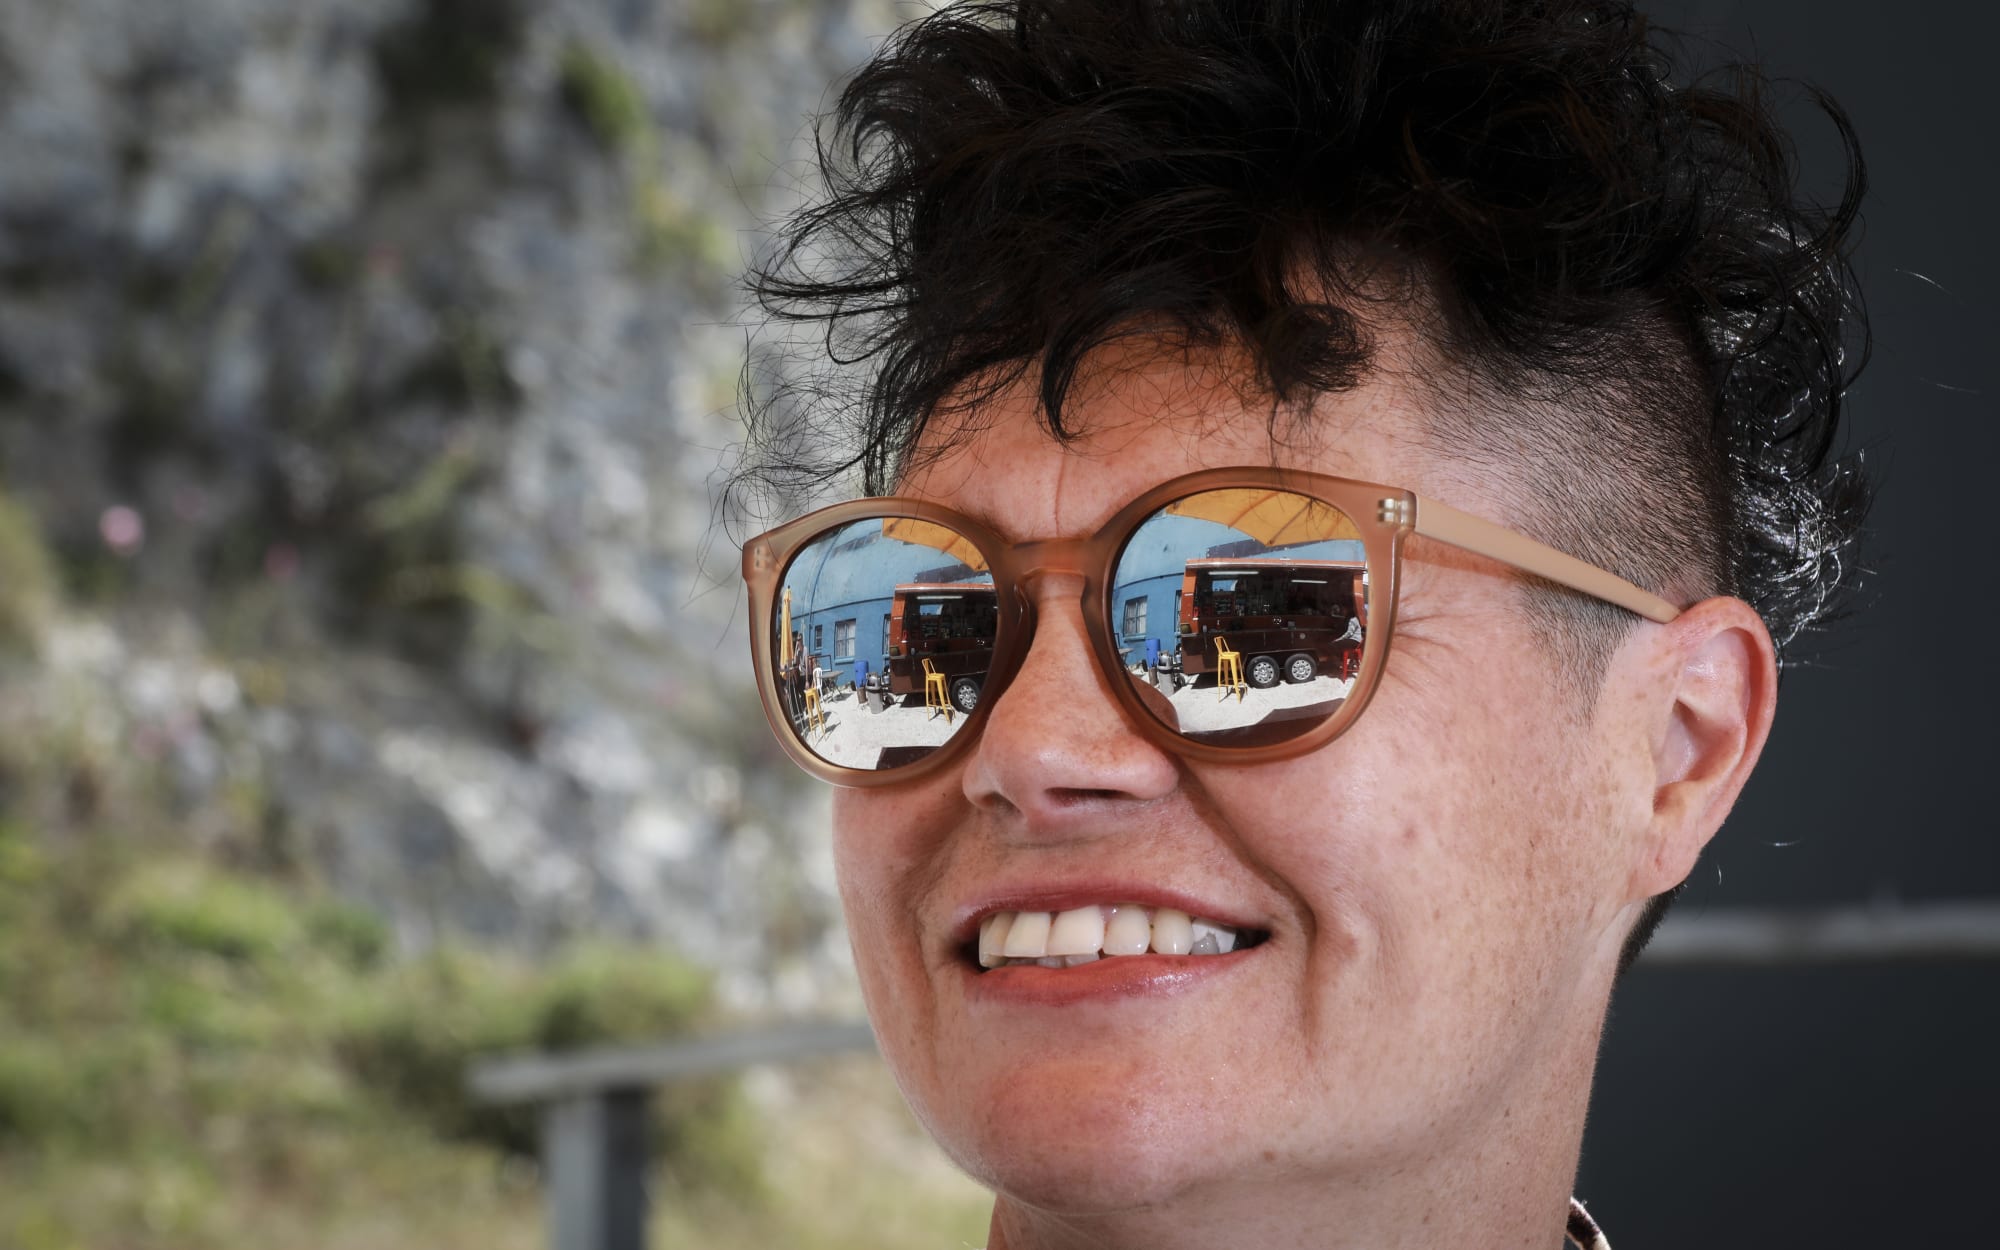 Sharon Rayner, owner/operator of The Cafe Cart in Kaikoura. Sharon and her team were a hub for residents, tourists and recovery crew during the aftermath of the quake.